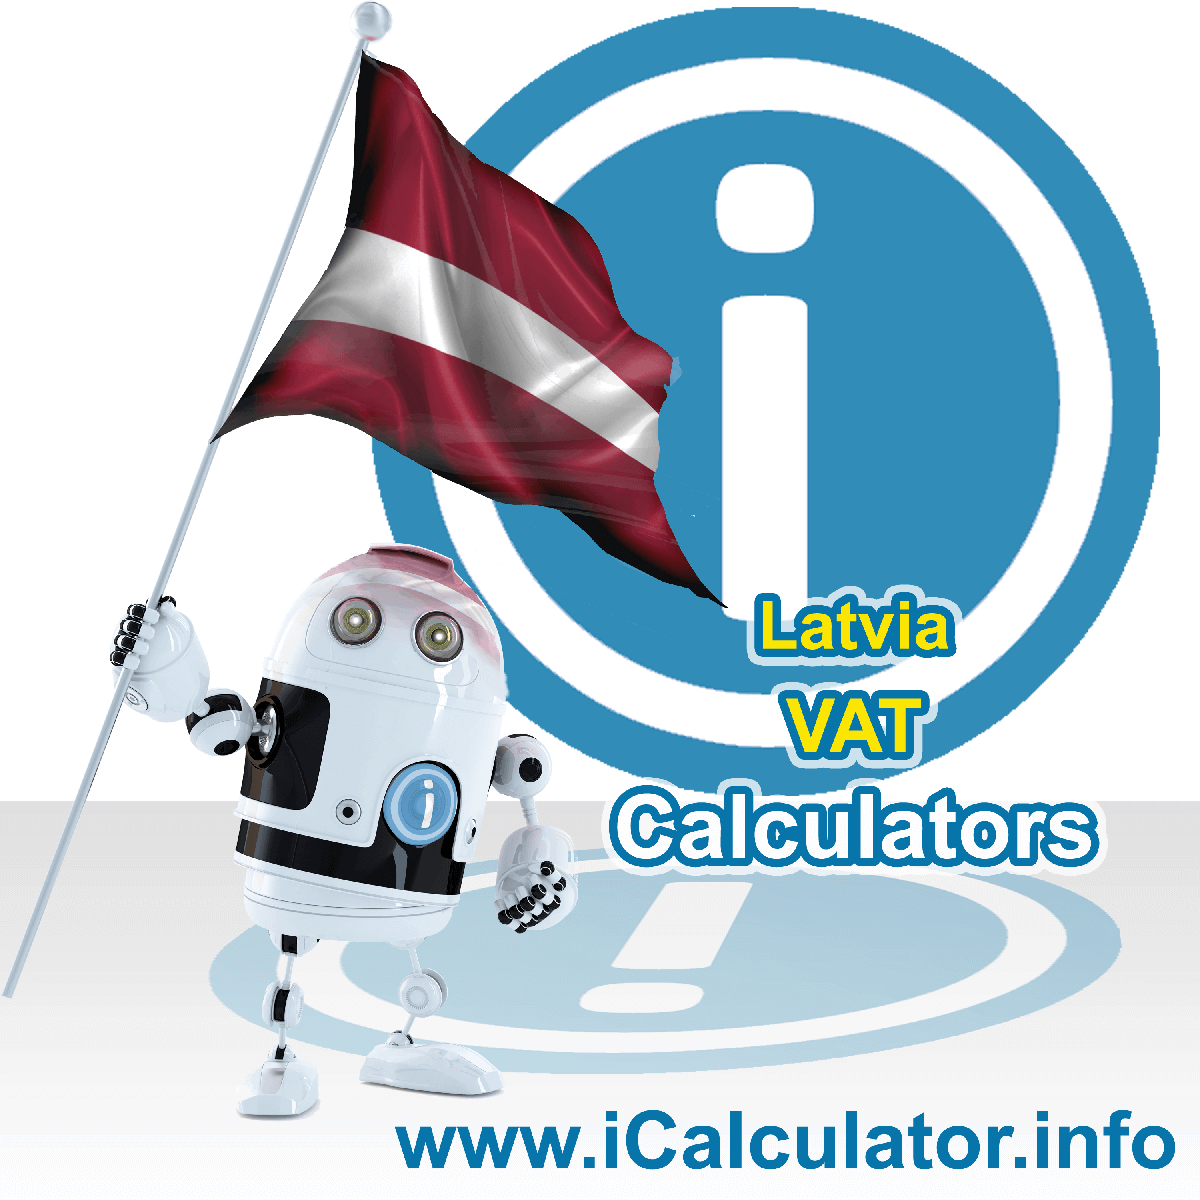 Latvia VAT Calculator. This image shows the Latvia flag and information relating to the VAT formula used for calculating Value Added Tax in Latvia using the Latvia VAT Calculator in 2023